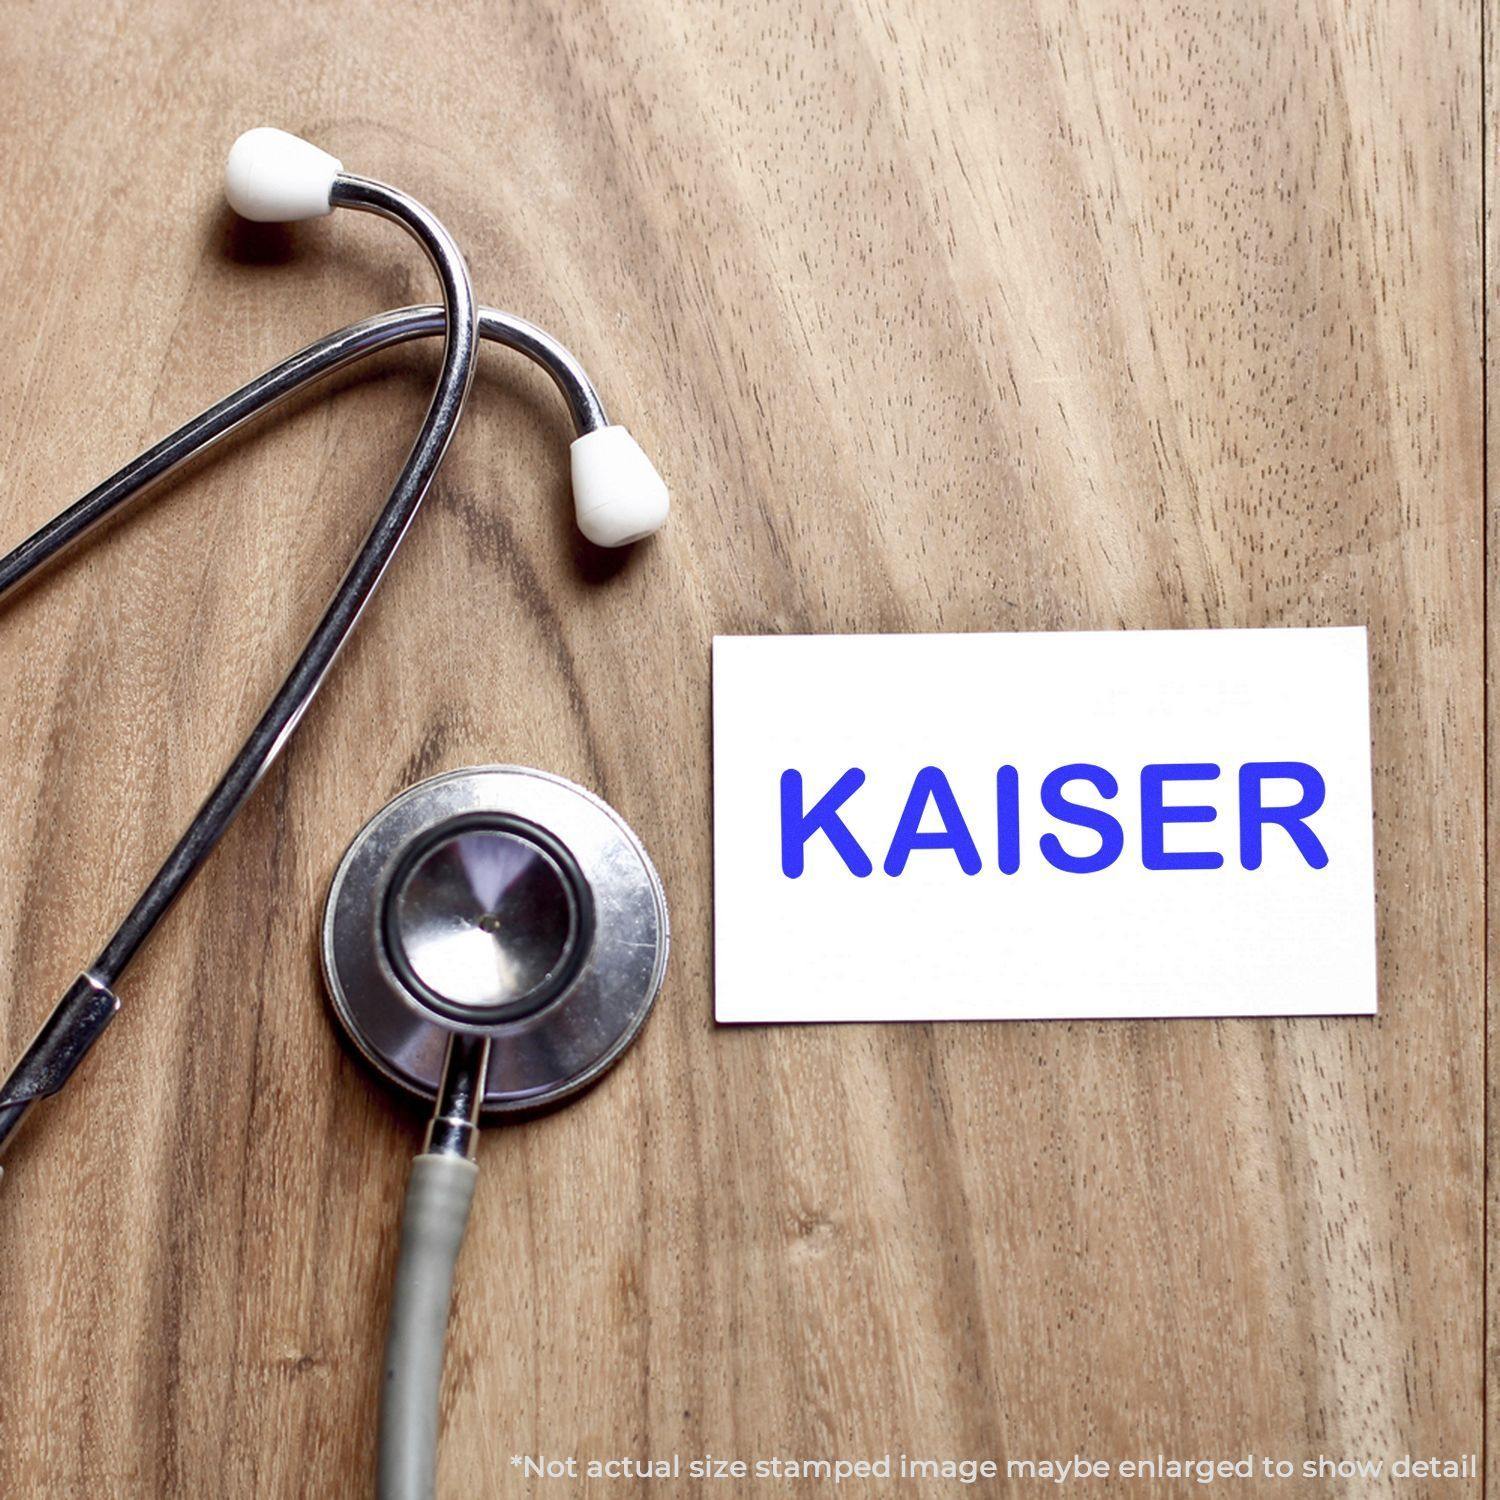 A stock office rubber stamp with a stamped image showing how the text "KAISER" is displayed after stamping.